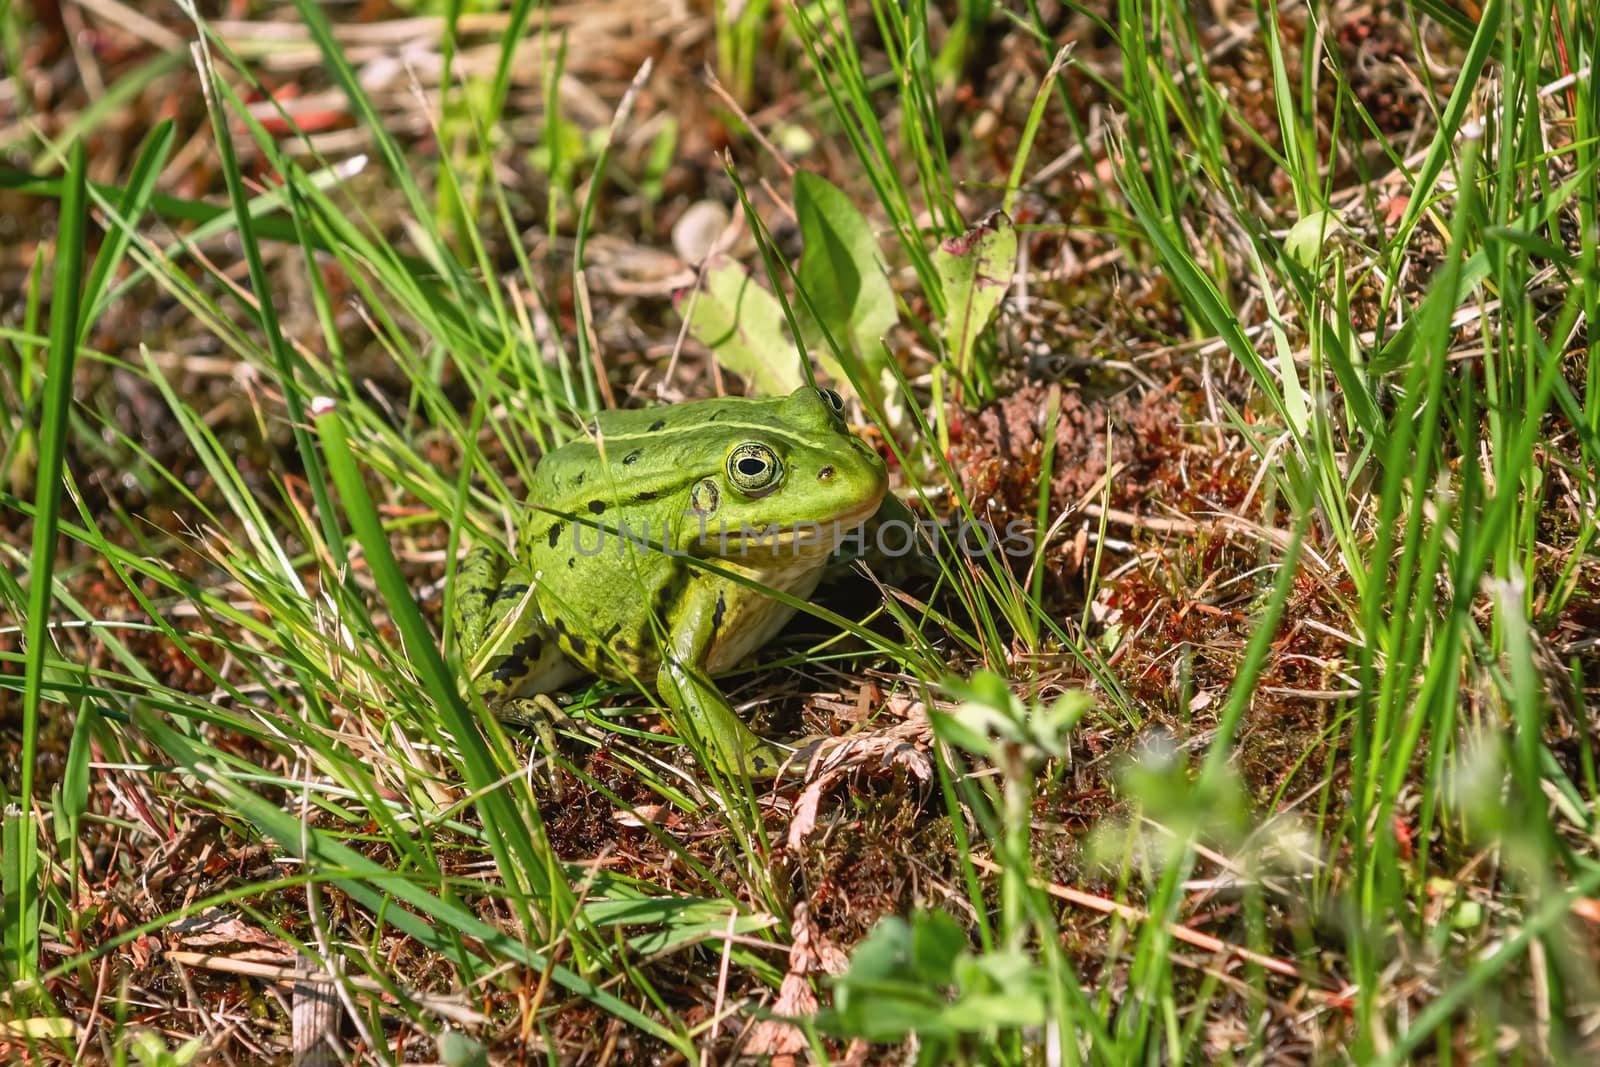 Green frog in the grass near the pond